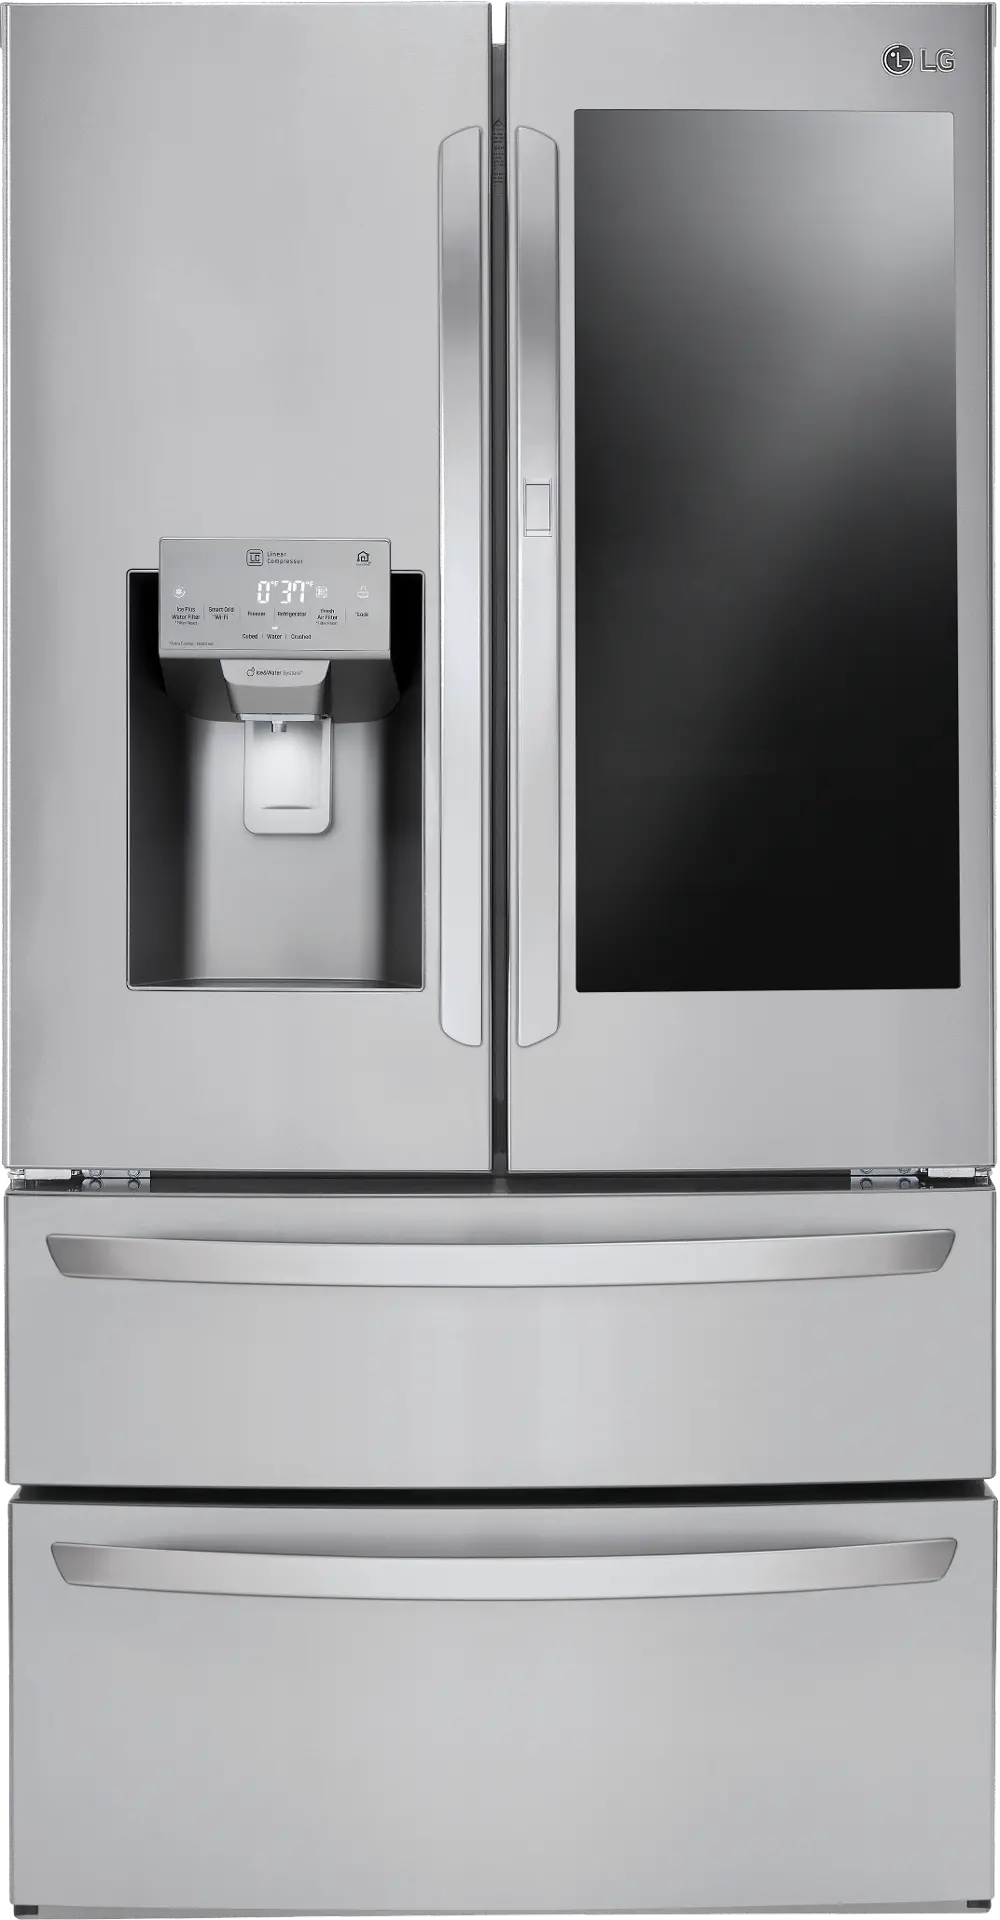 LMXS28596S LG 27.6 cu ft French Door Refrigerator - Stainless Steel-1